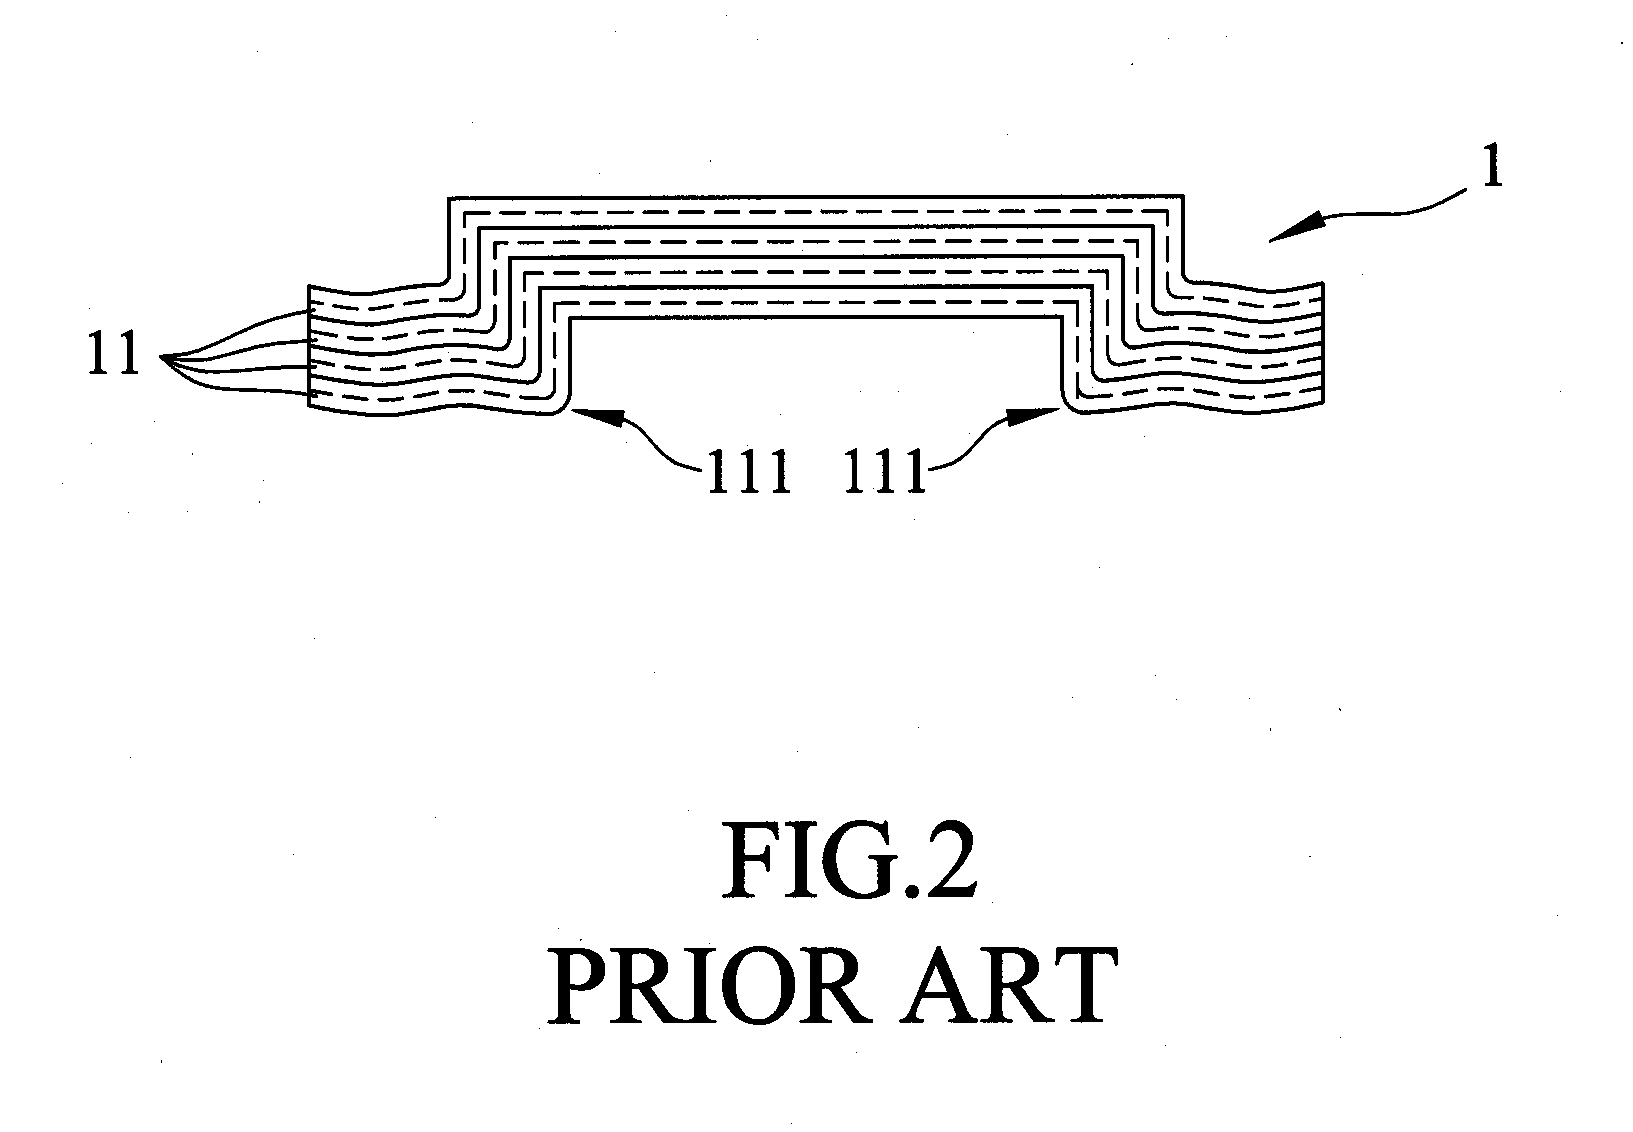 Method for making a molded composite article